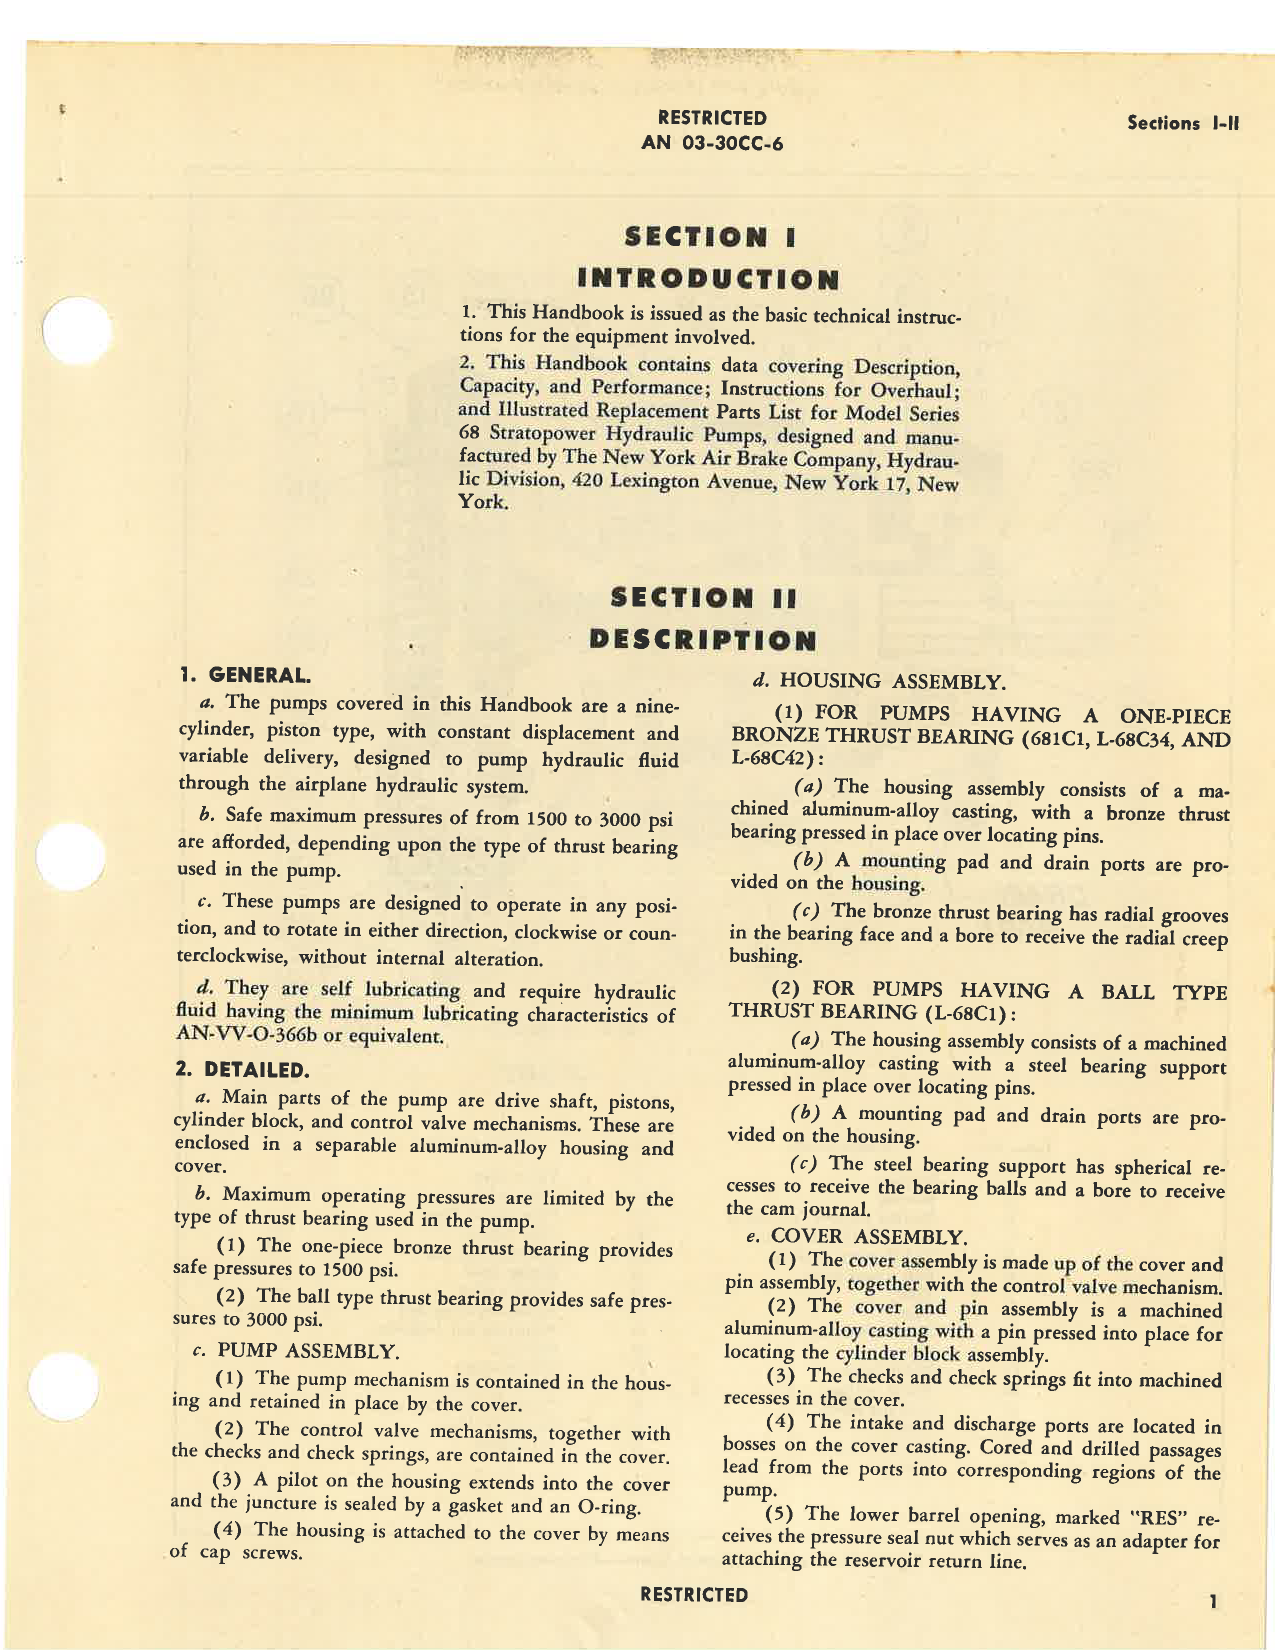 Sample page 5 from AirCorps Library document: Handbook of Overhaul Instructions with Parts Catalog for Model Series 68 Stratopower Hydraulic Pumps